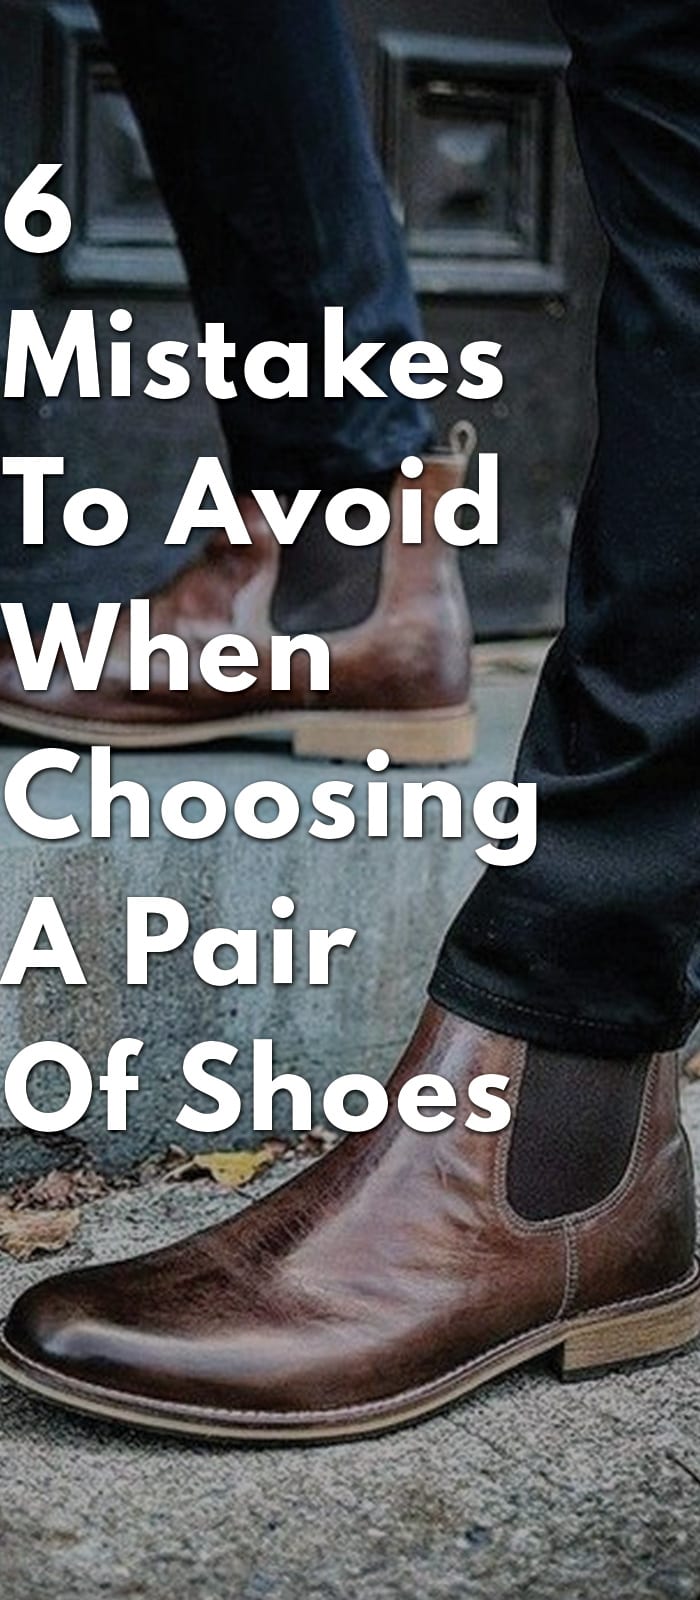 6-Mistakes-To-Avoid-When-Choosing-a-Pair-of-Shoes